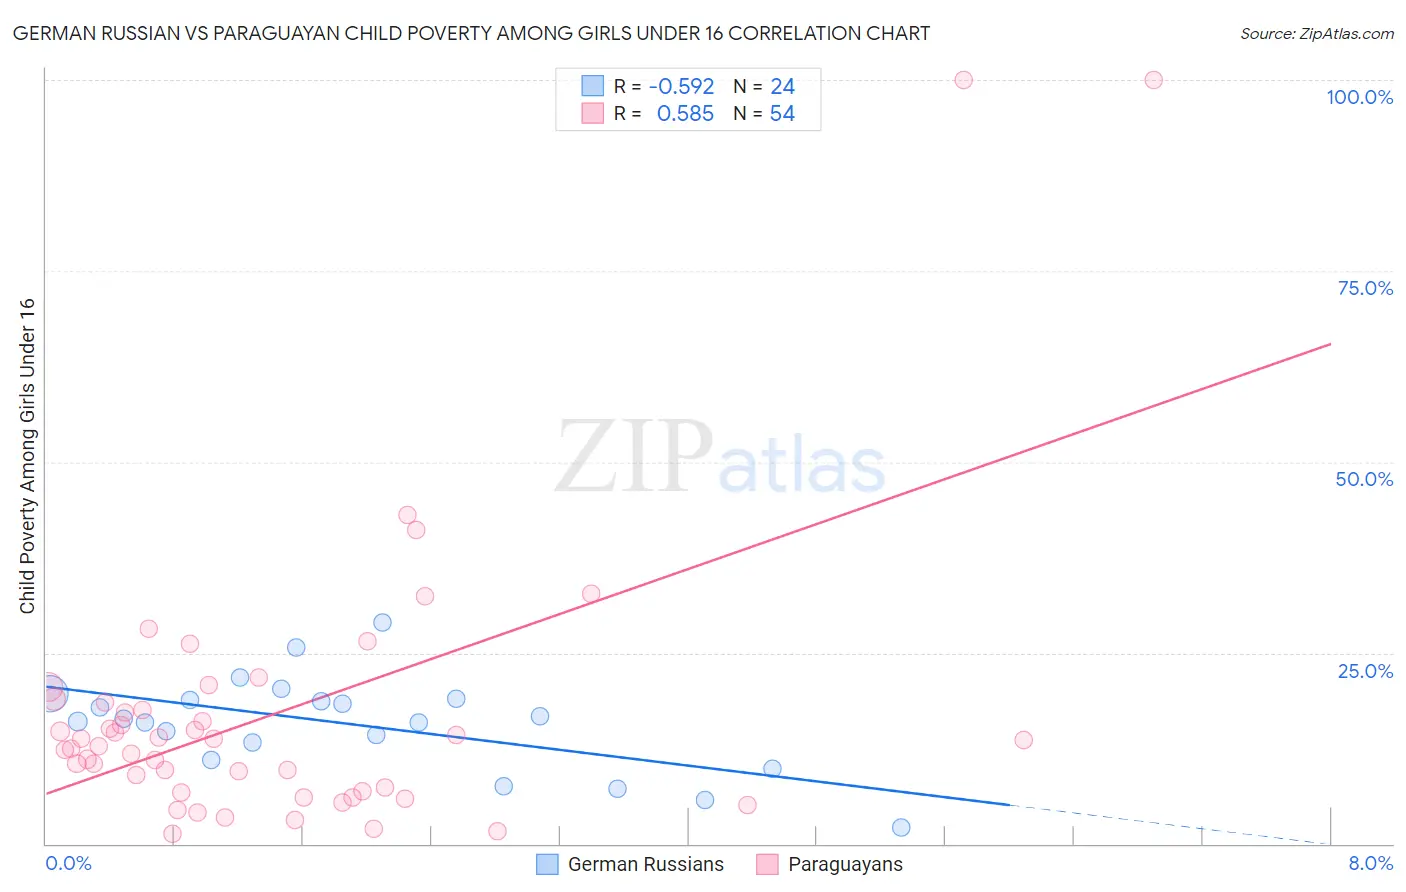 German Russian vs Paraguayan Child Poverty Among Girls Under 16